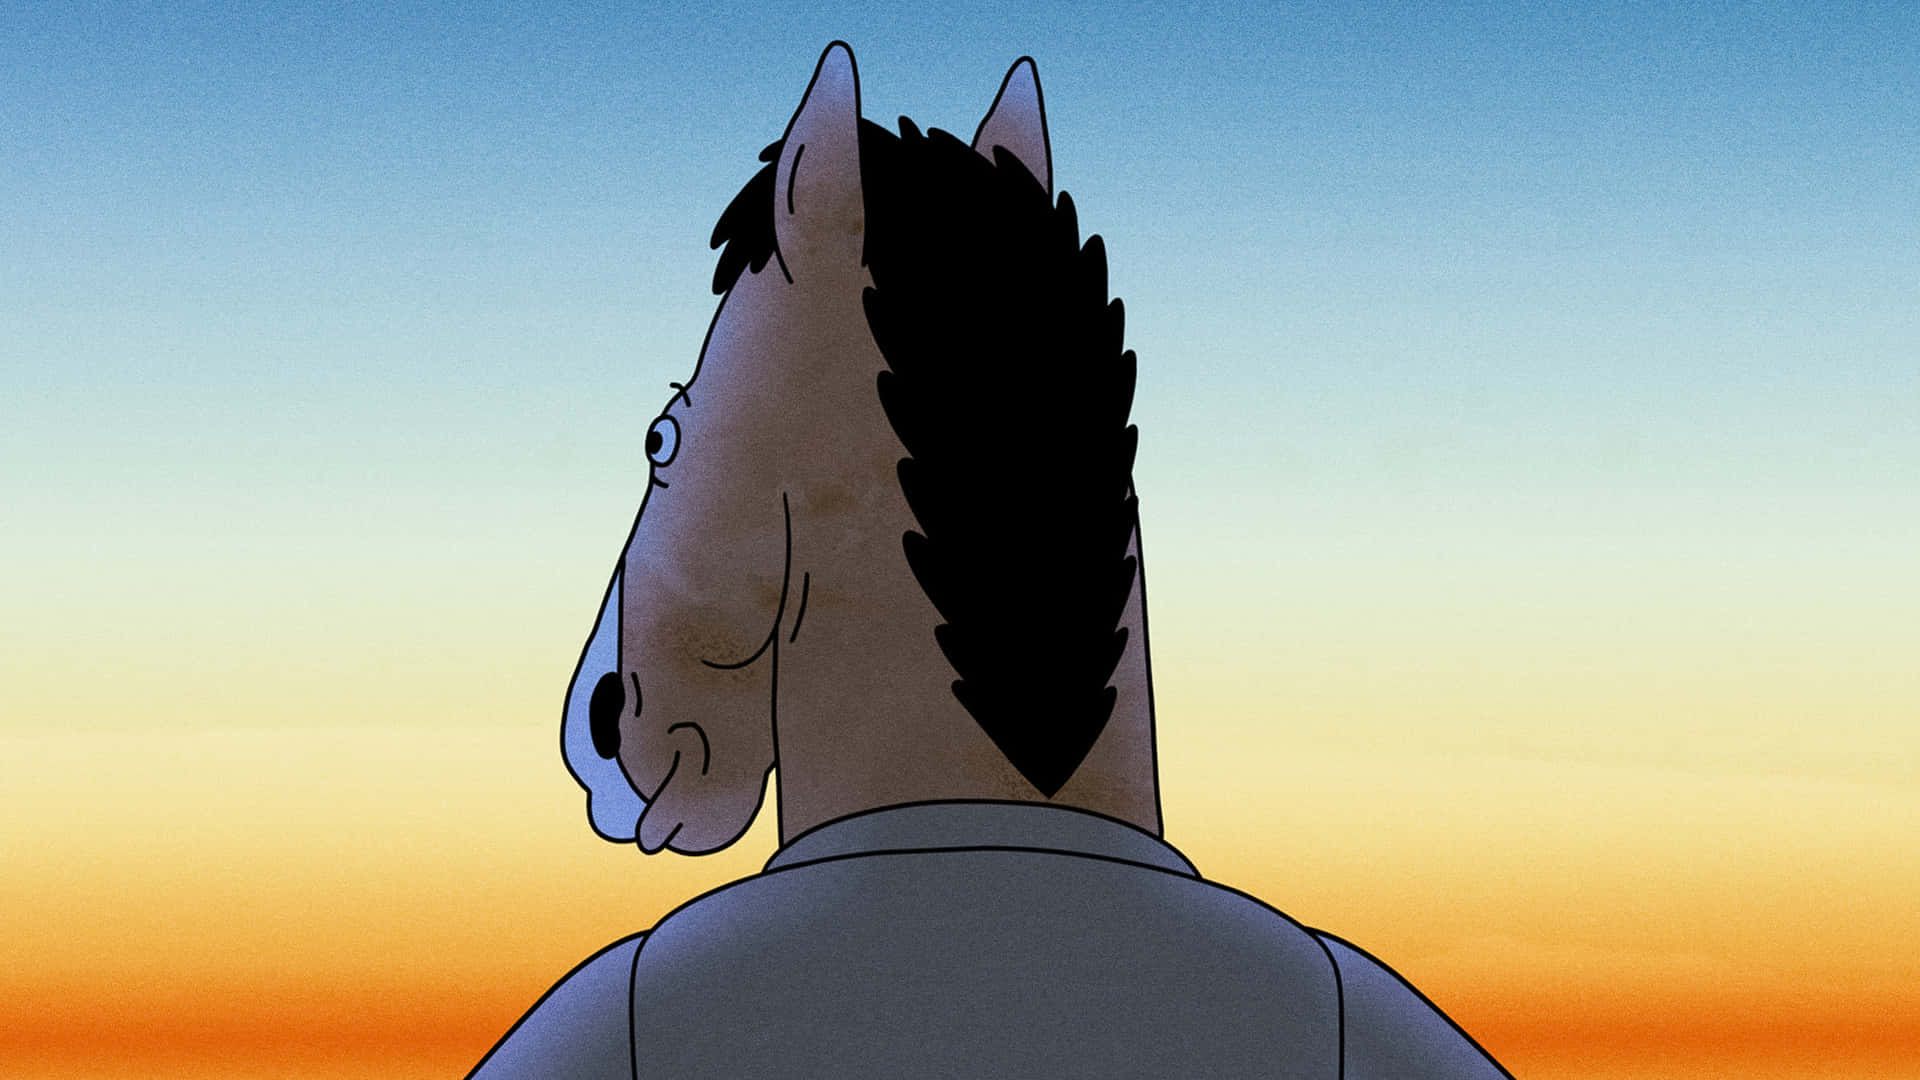 Bojack Horseman faces off with his own demons